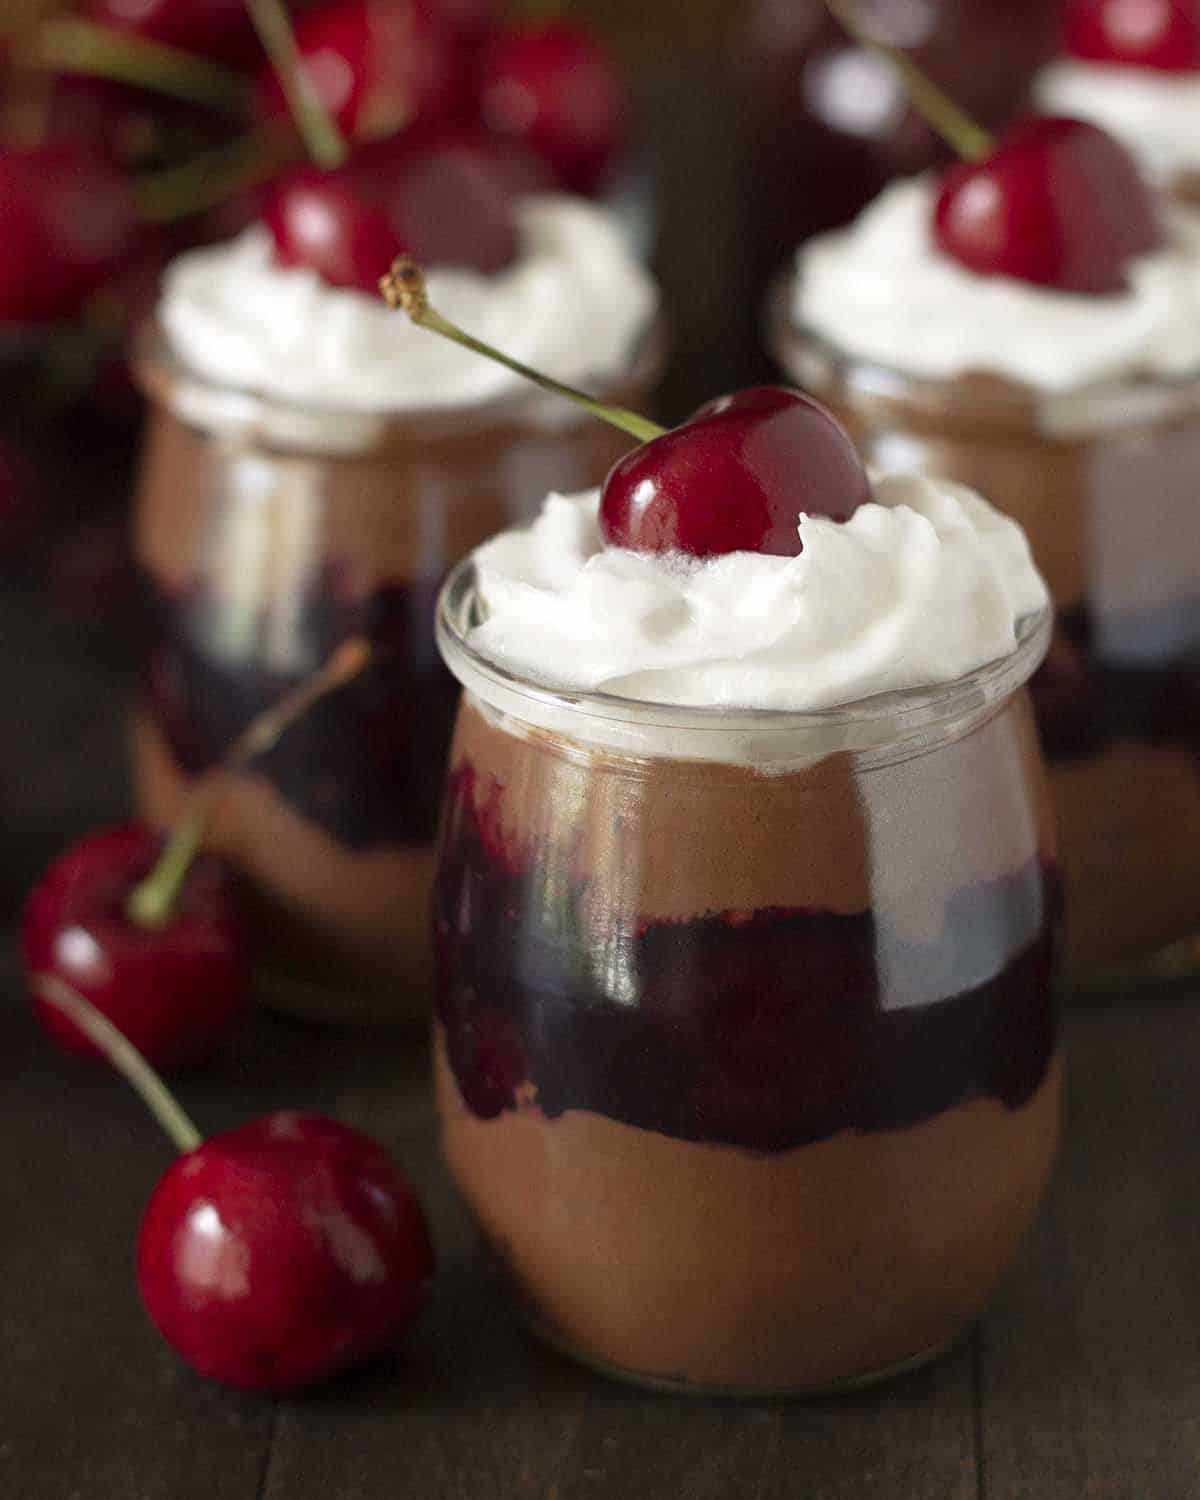 A dessert glass filled with vegan chocolate mousse layered with cherry sauce and whipped cream, and topped with a cherry.